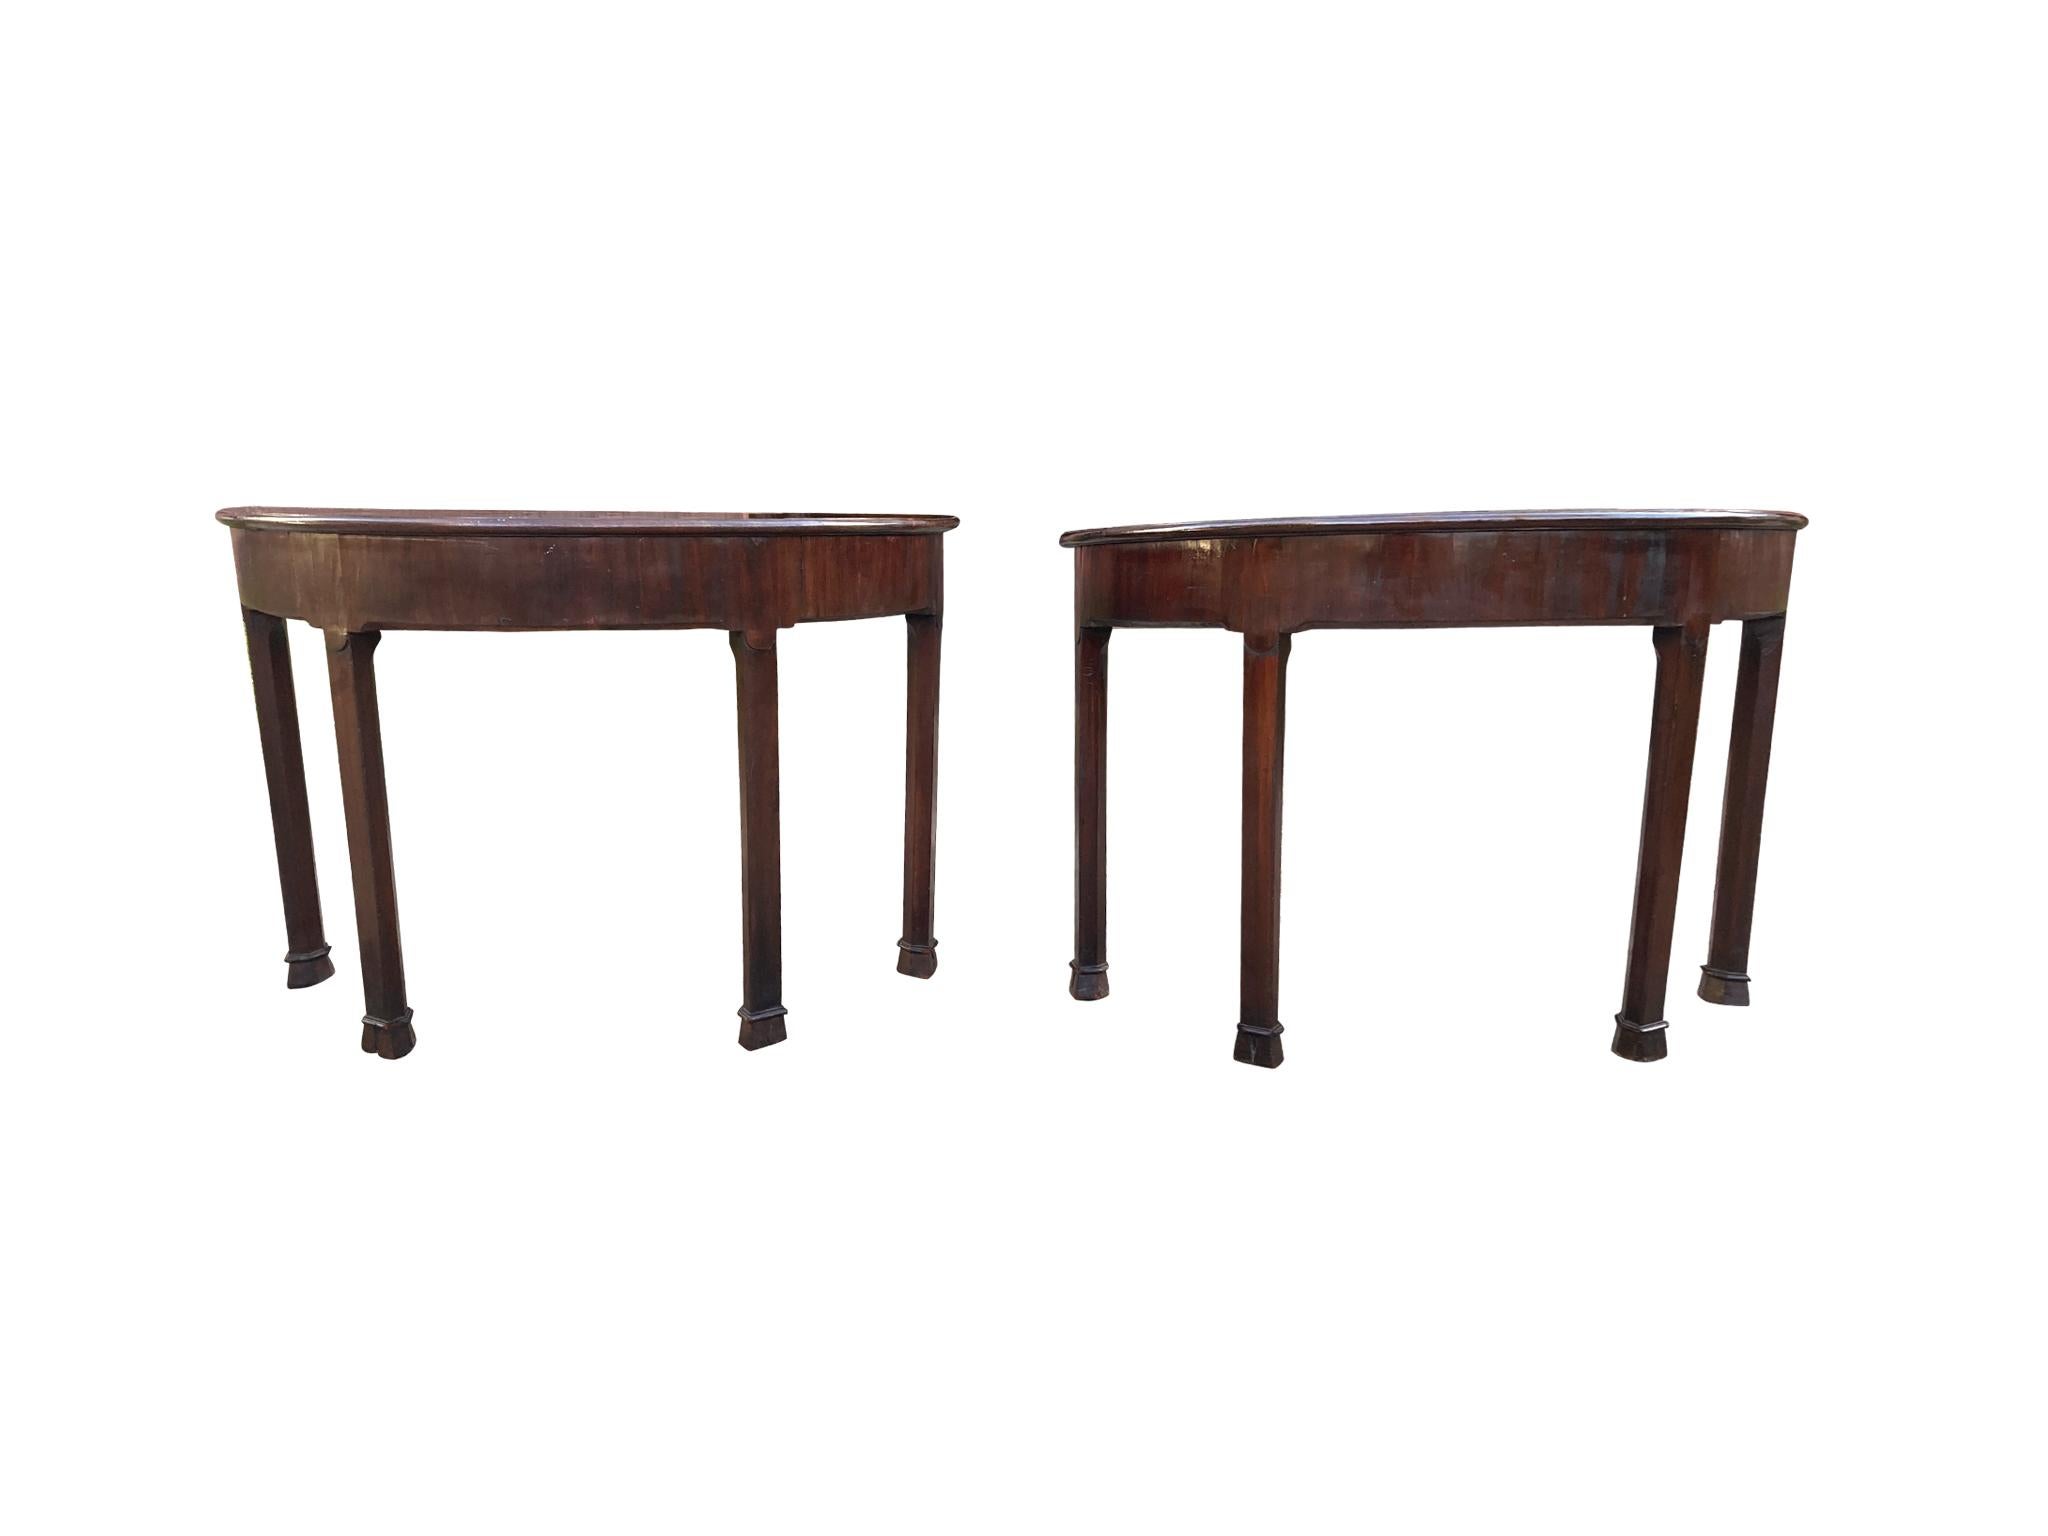 A lovely pair of American demilune tables, crafted in the 19th century. They are comprised of mahogany with mahogany veneer. The design is classical in its simplicity and symmetry. We love the table's subtle decorative qualities: the beveled edge,